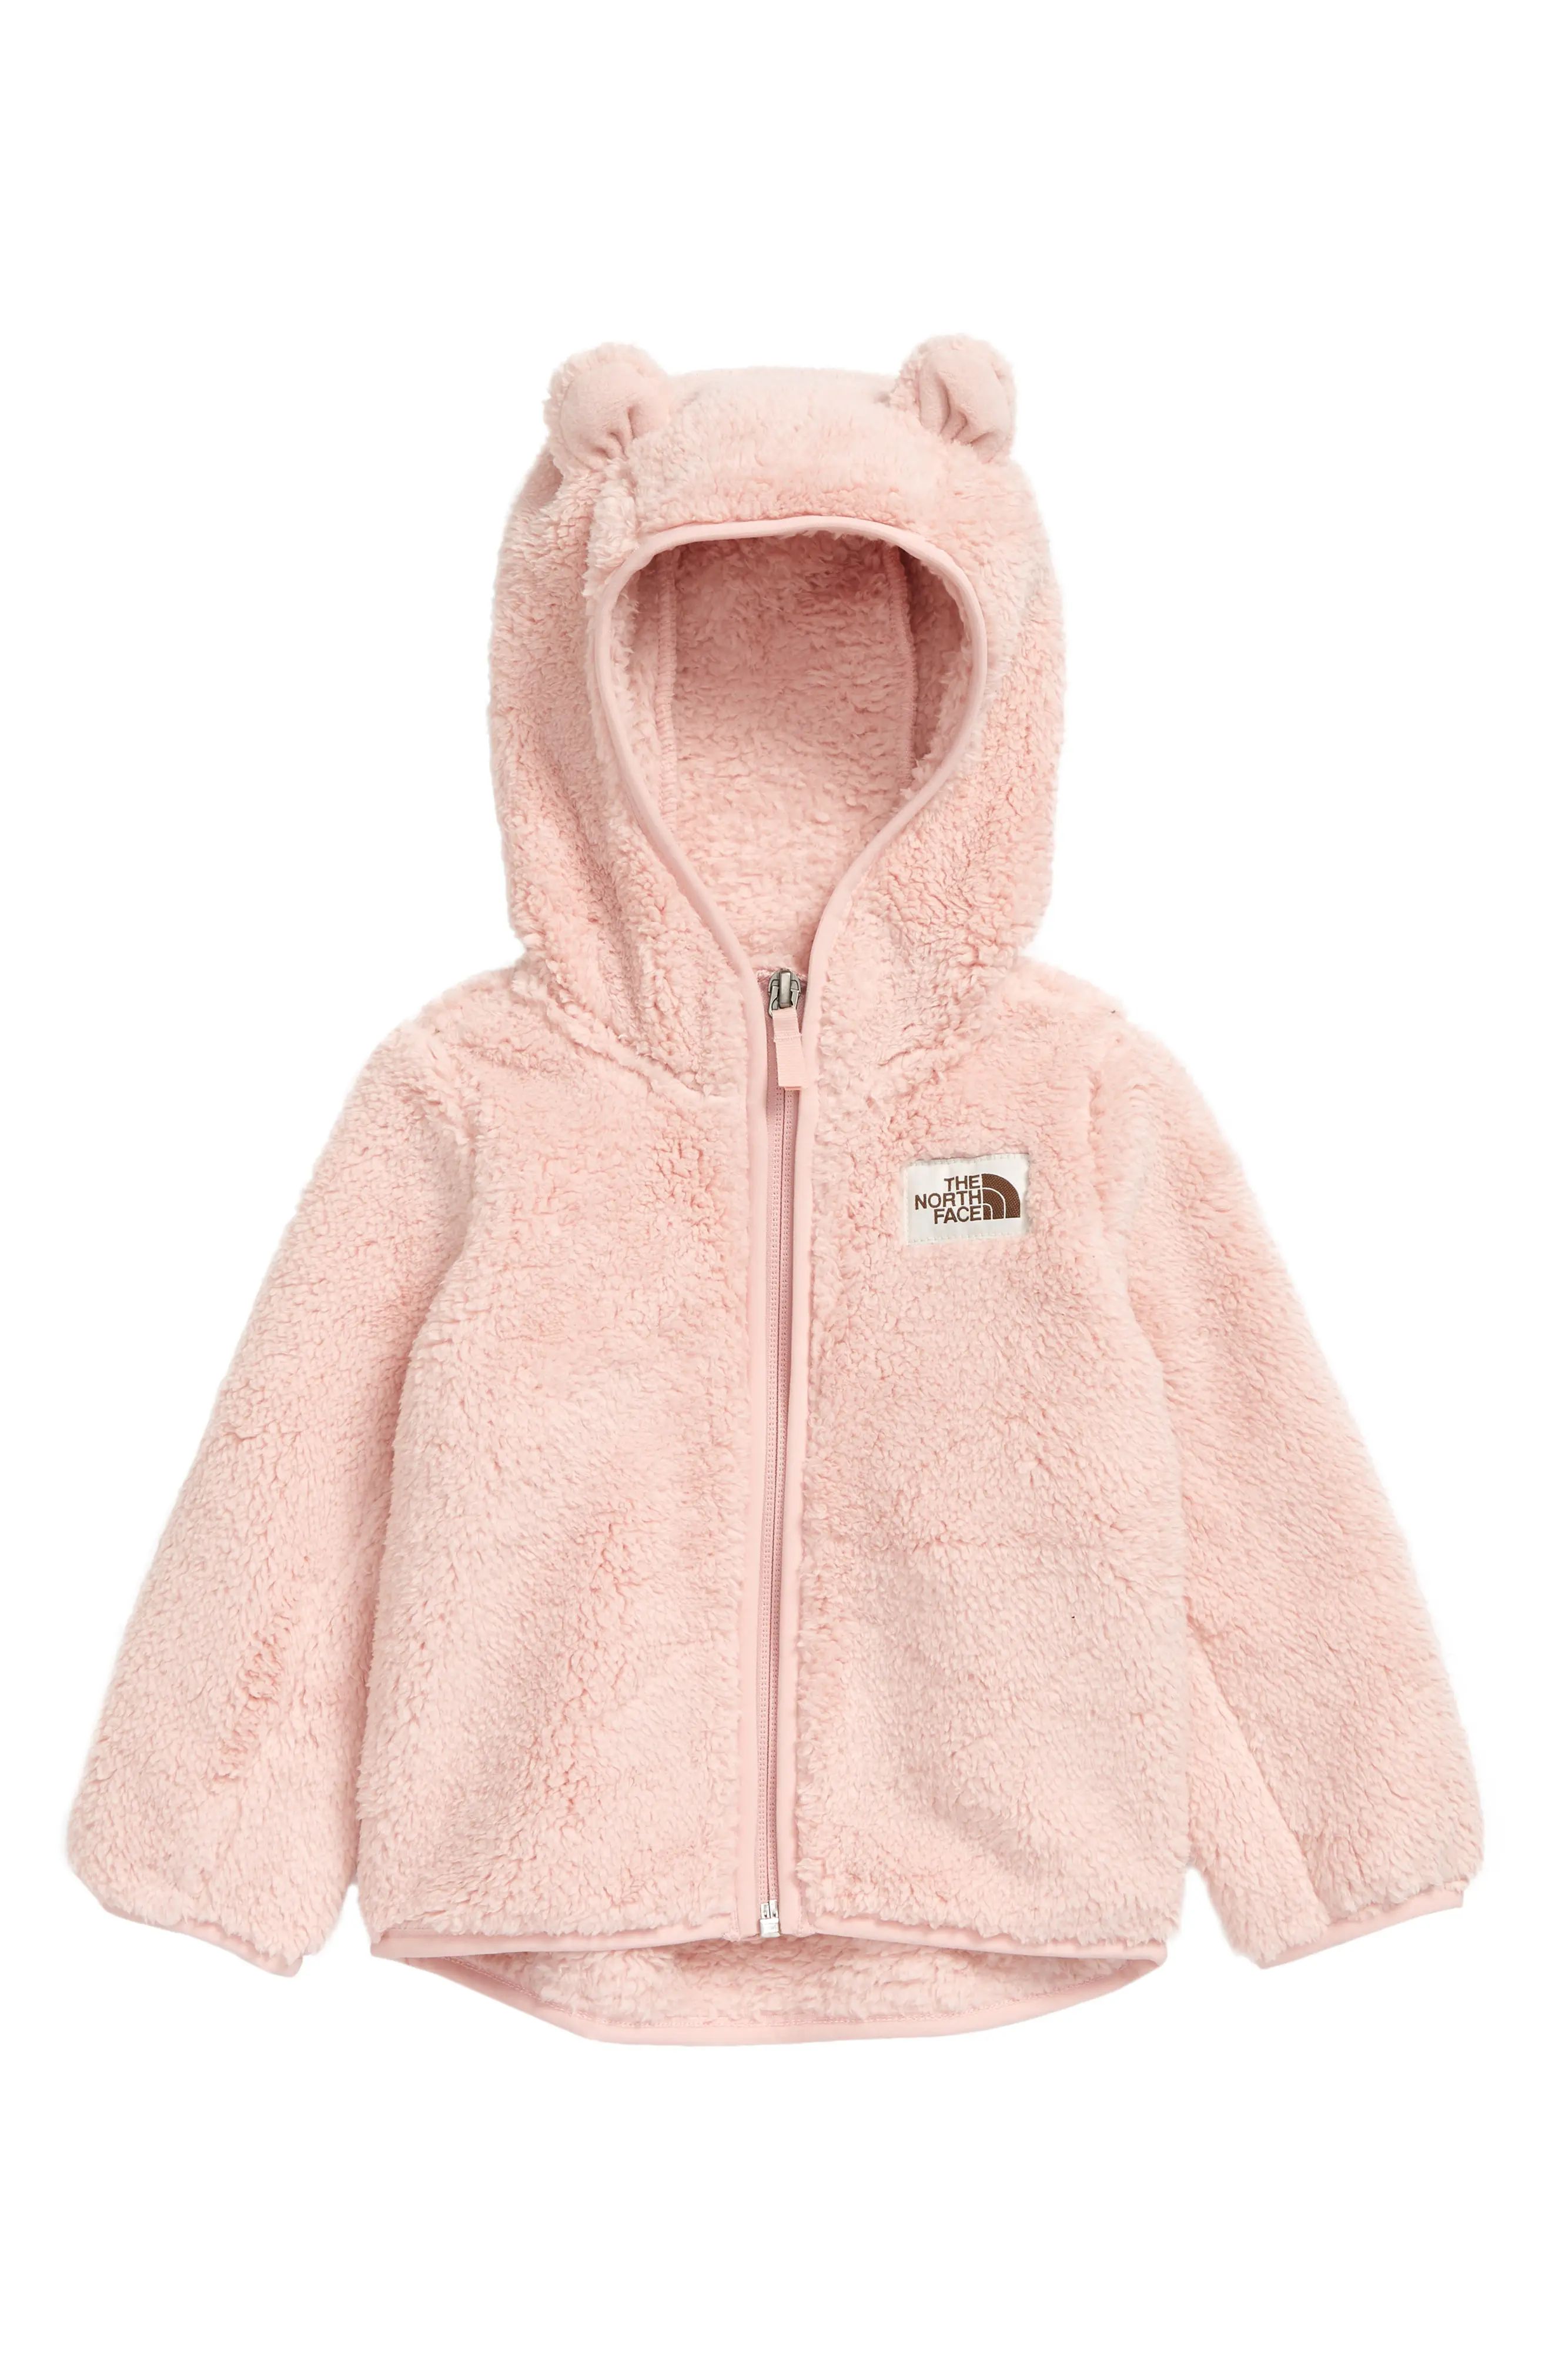 The North Face Campshire Bear Hooded Jacket, Size 12-18M in Peach Pink at Nordstrom | Nordstrom